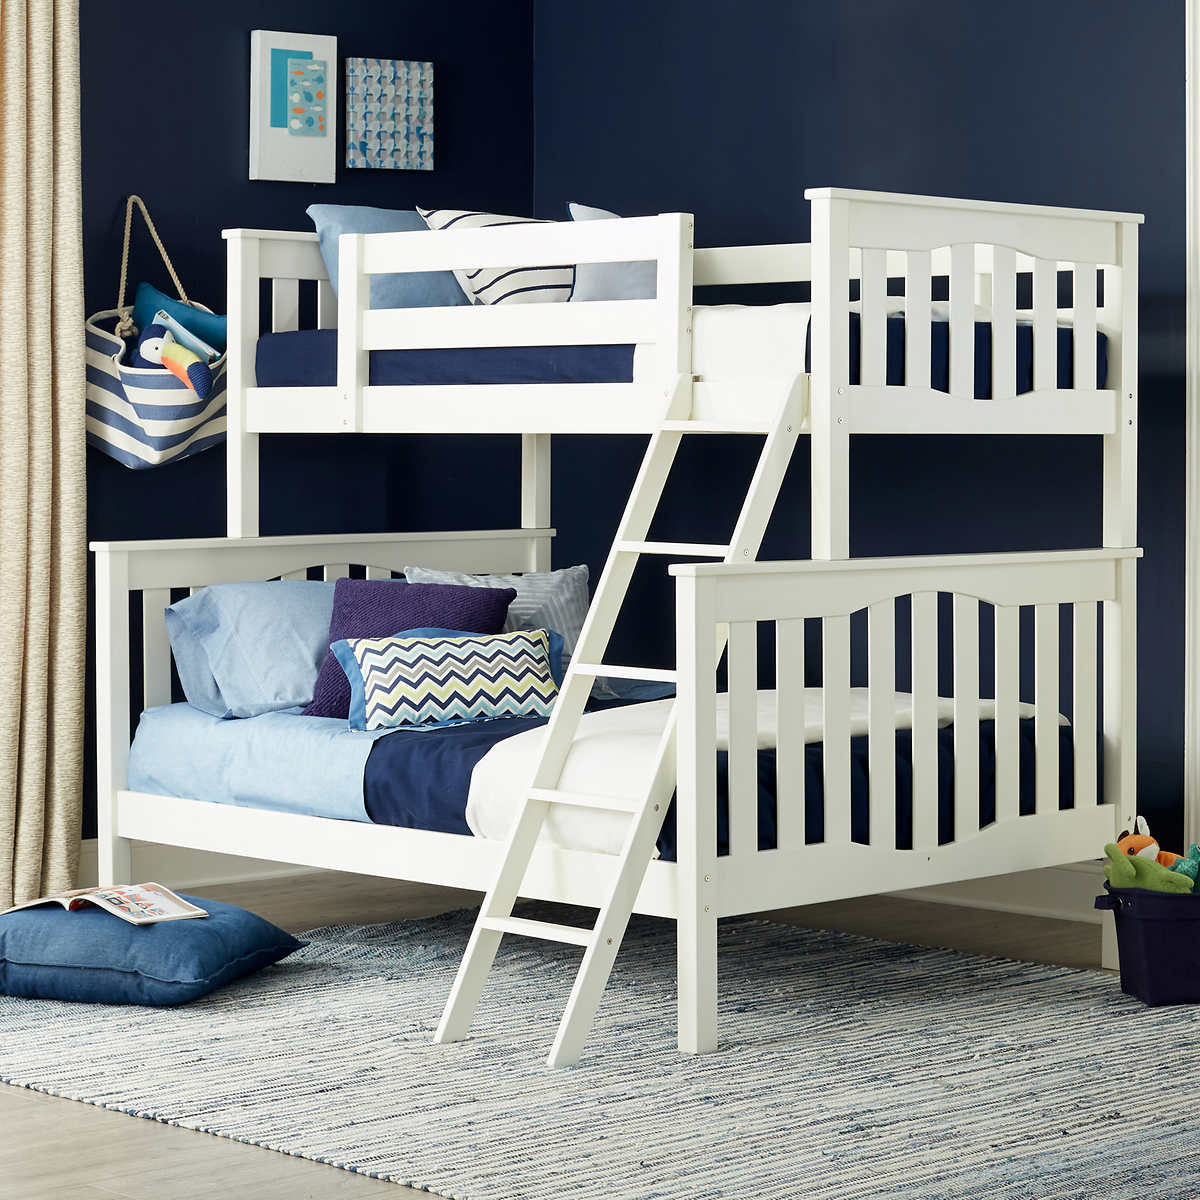 Seneca Twin Over Full Bunkbed Costco, Cot Bunk Beds For Twins